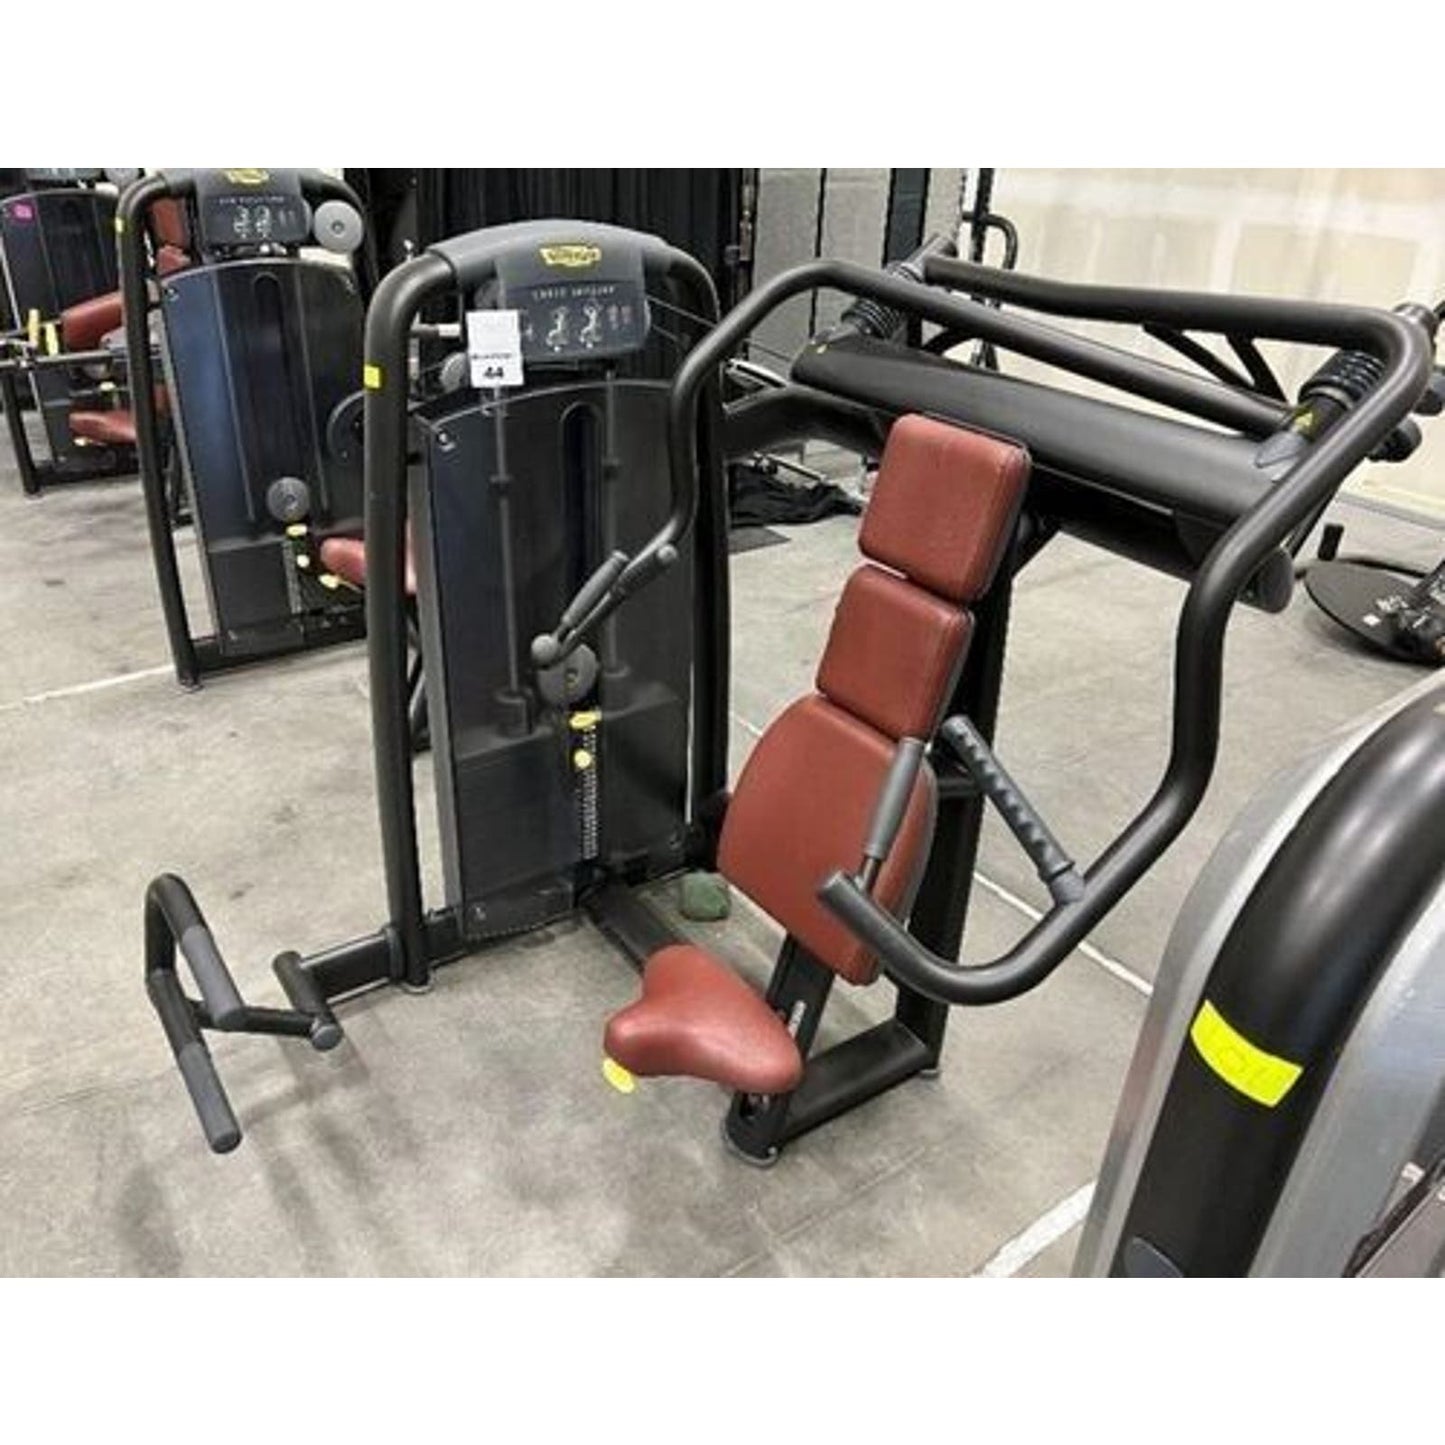 Technogym Selection Chest Incline Exercise Machine